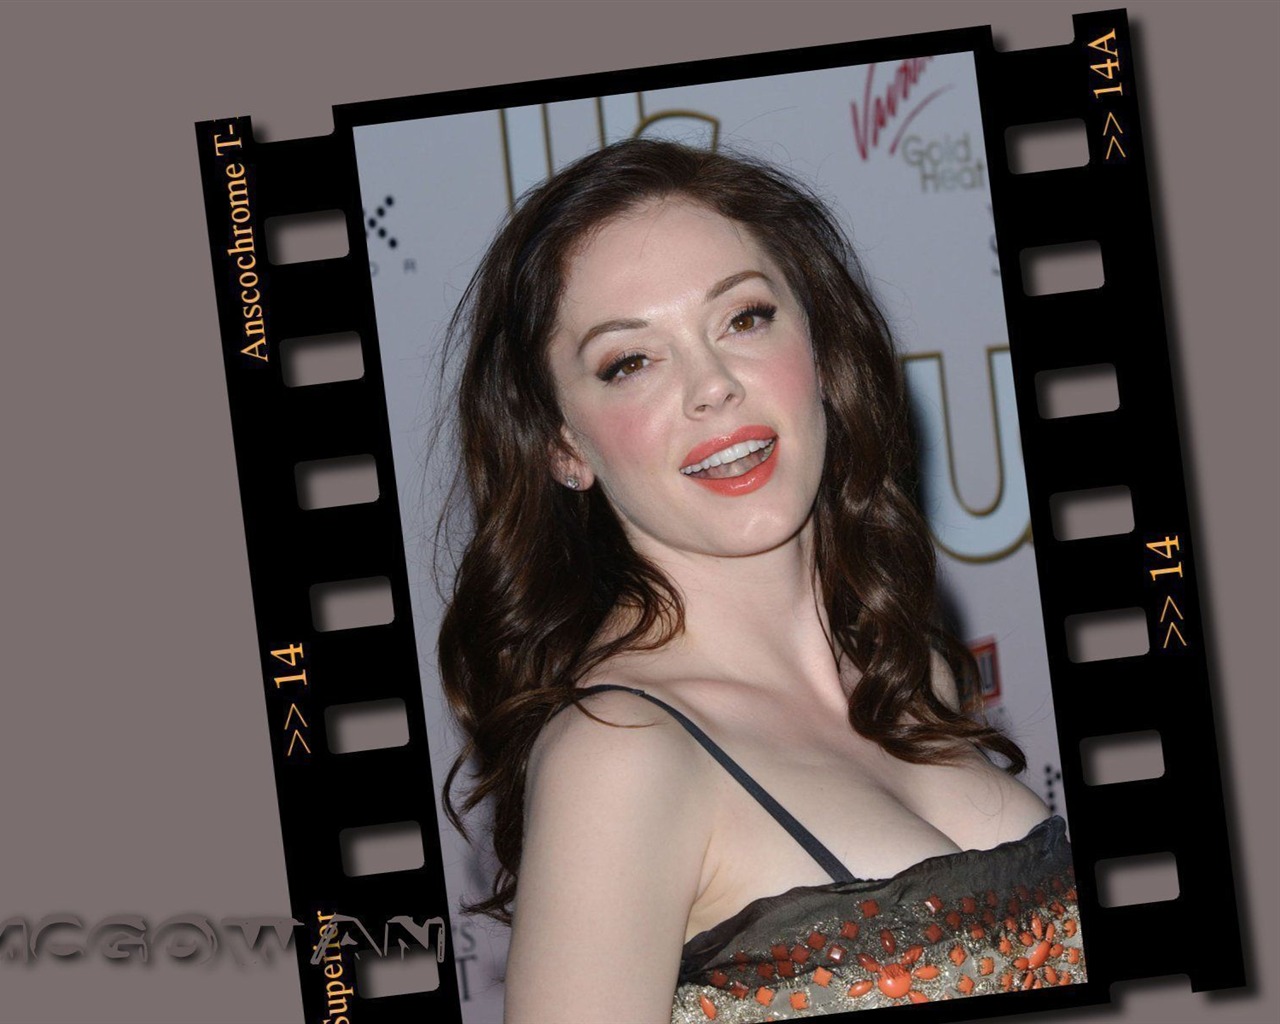 Rose McGowan #002 - 1280x1024 Wallpapers Pictures Photos Images.